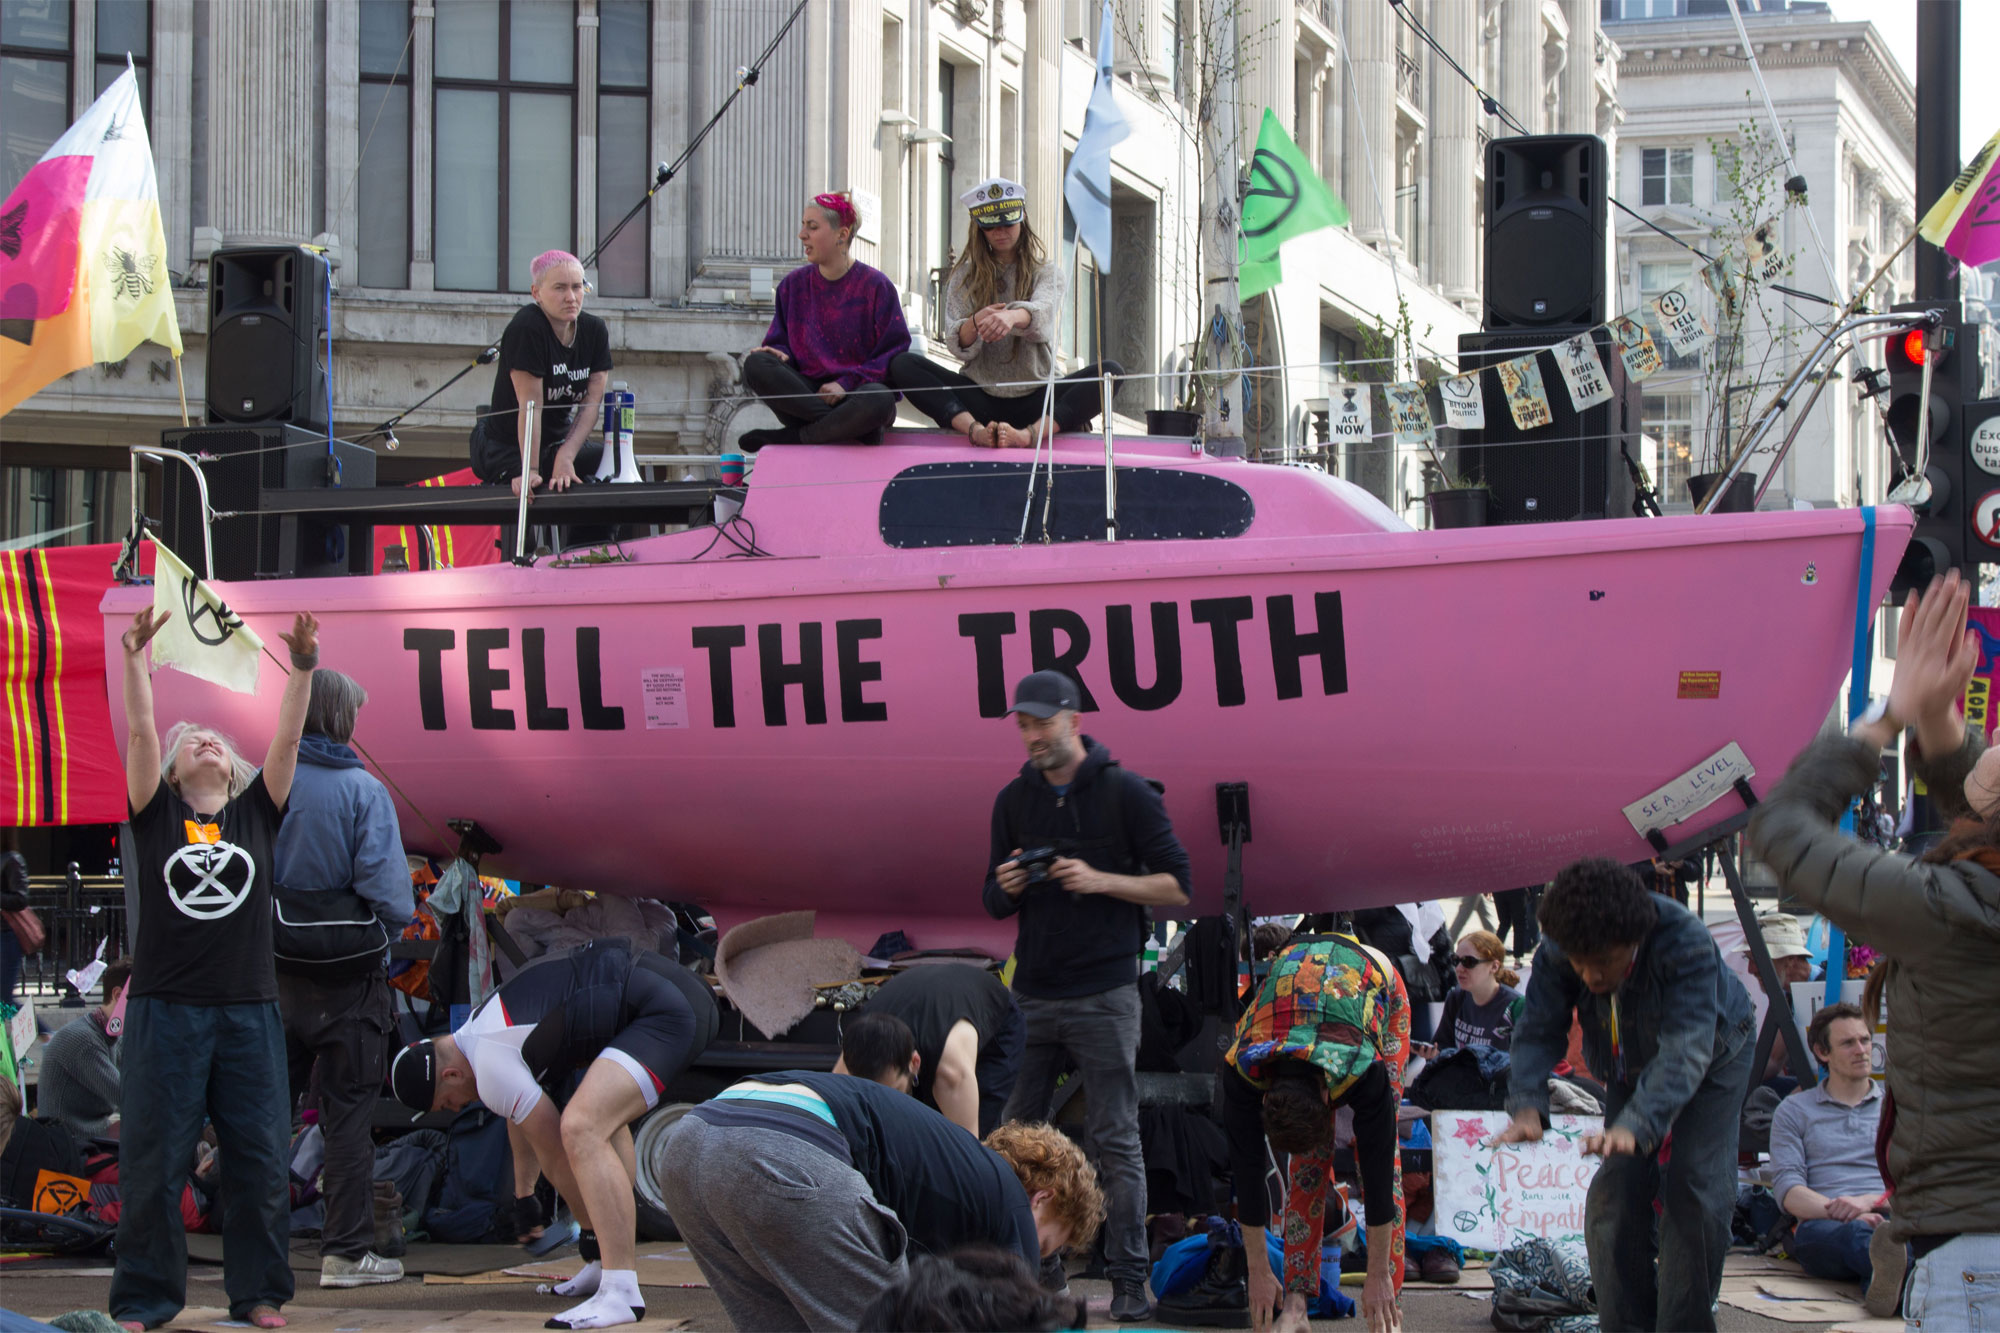 Extinction Rebellion protesters gathered around a pink boat emblazoned with the slogan 'Tell the truth'